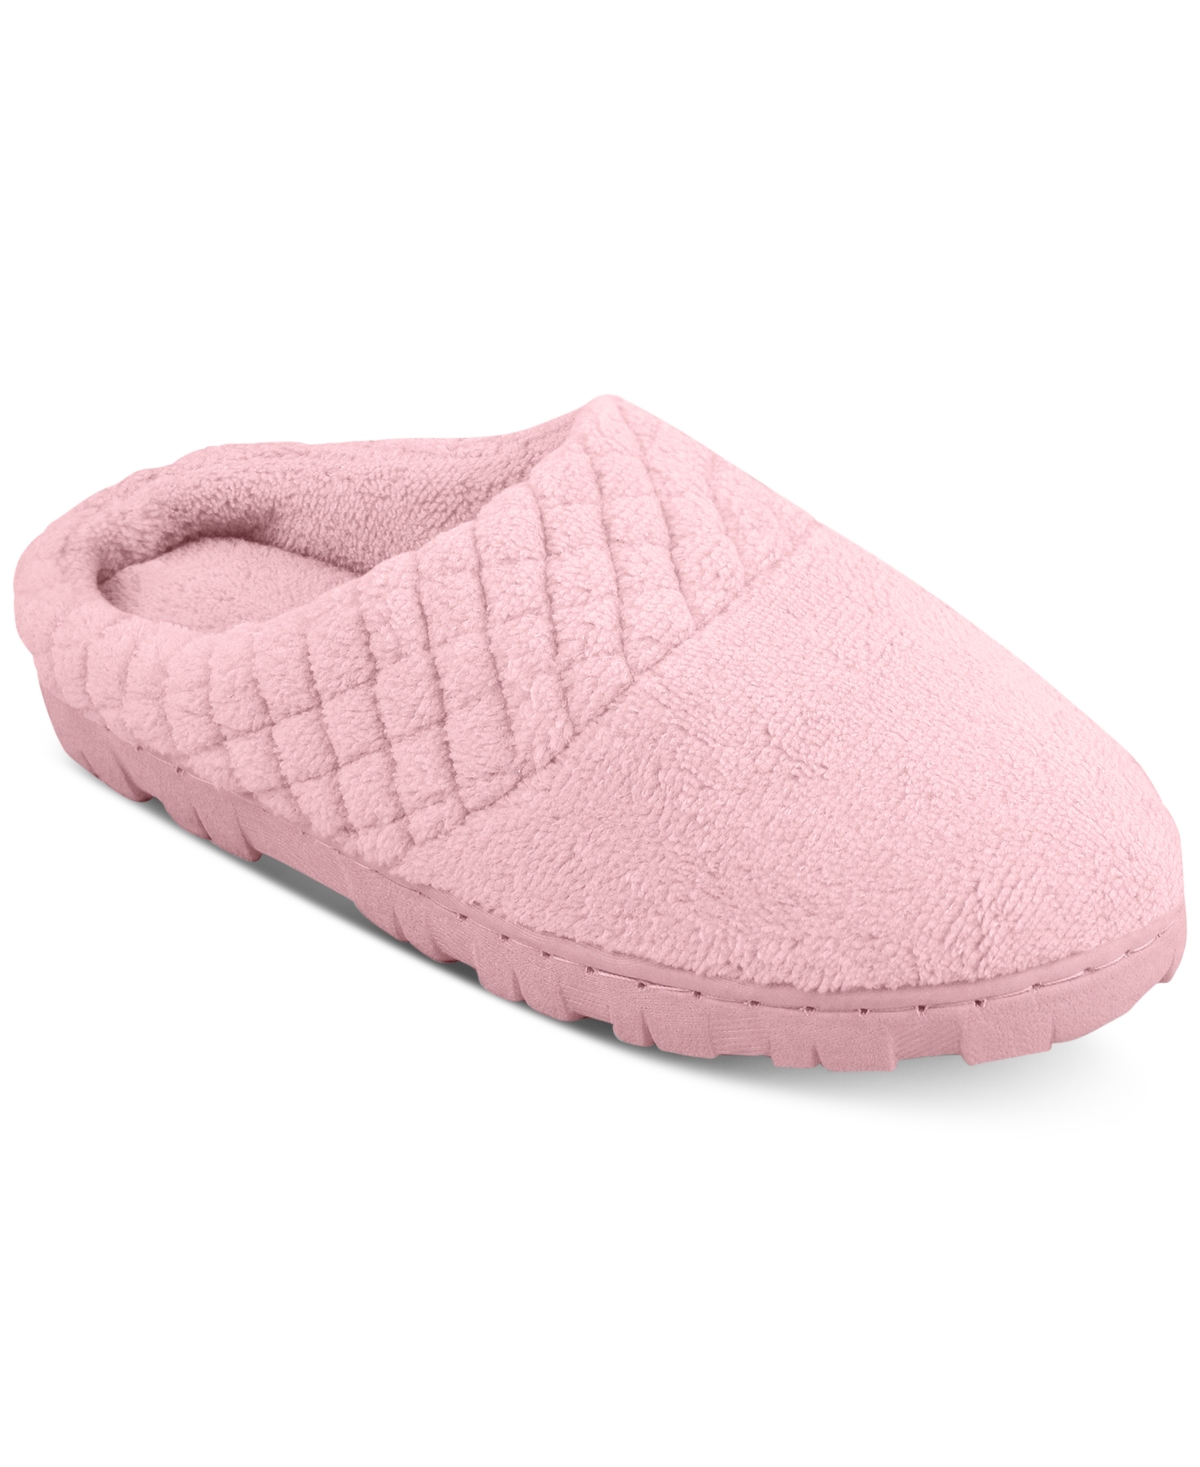 Women's Quilted Clothes Slipper - Pink